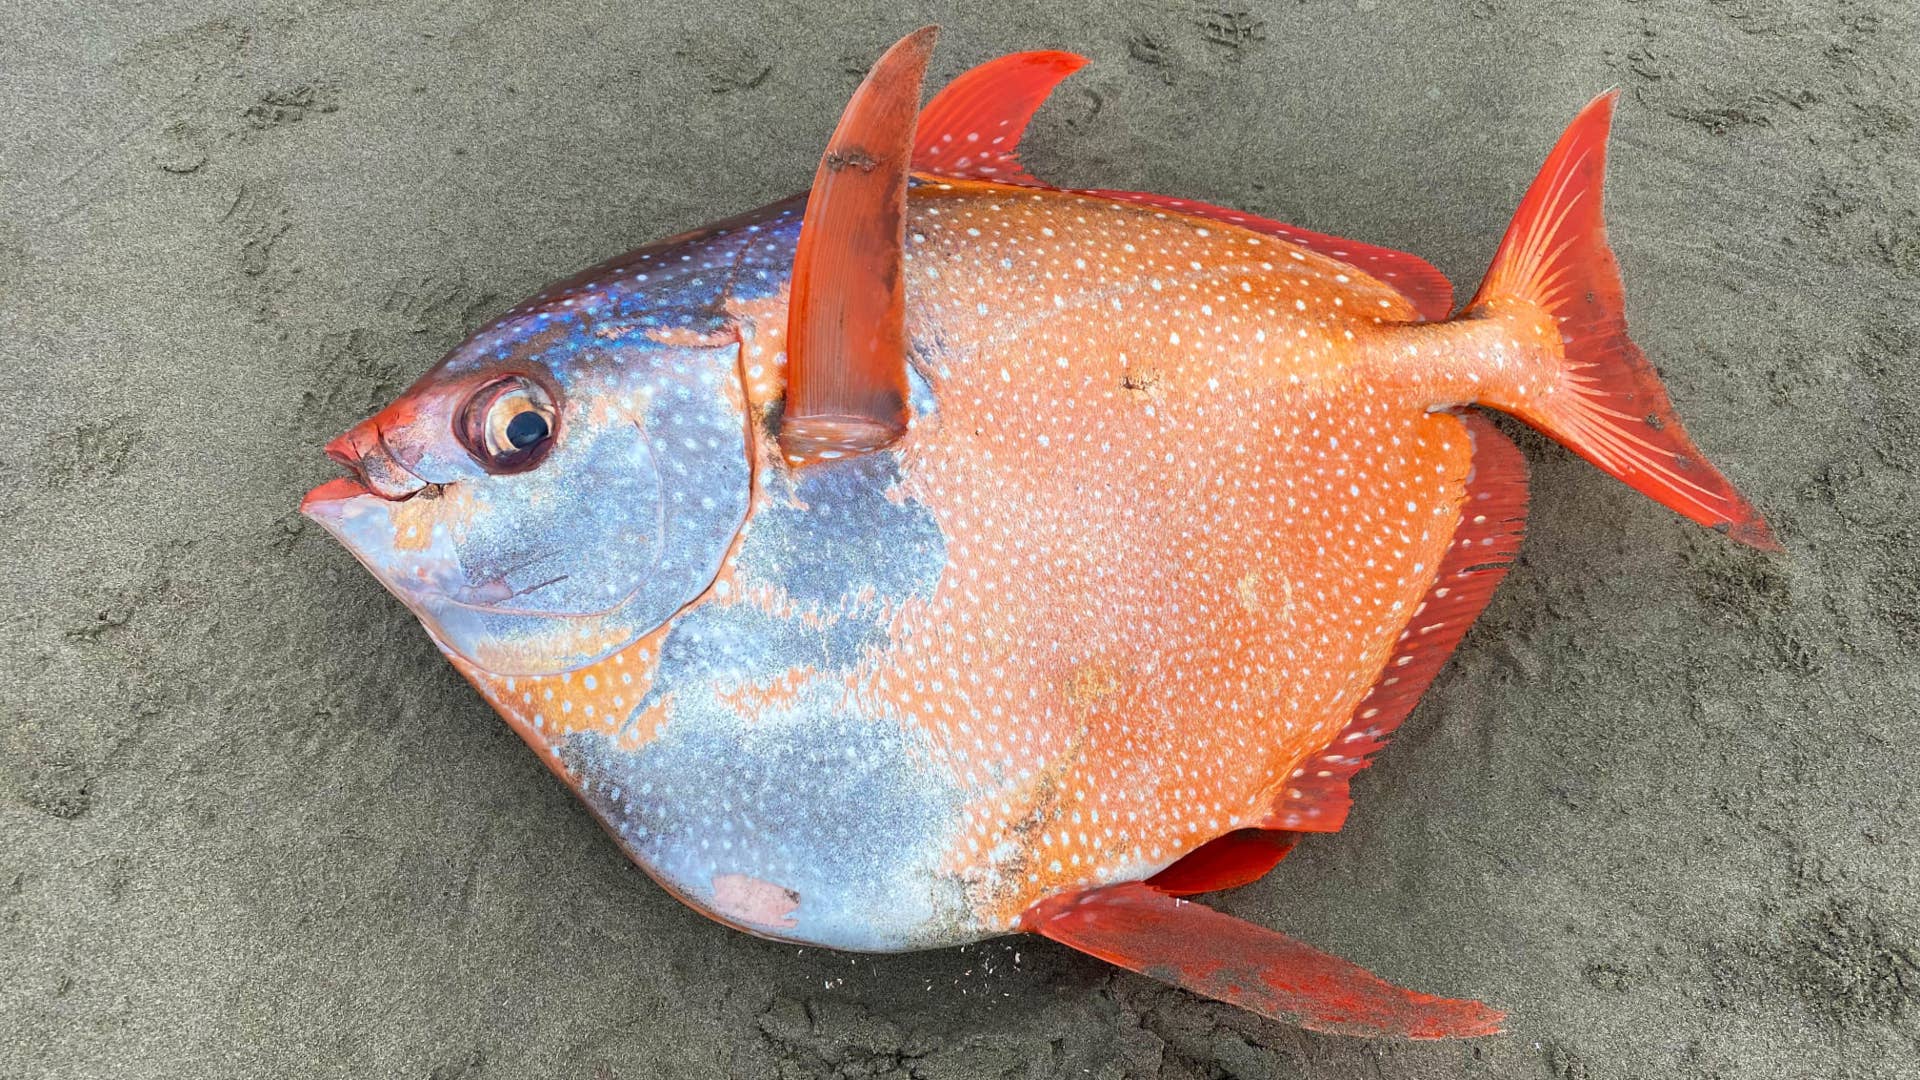 A photo of an opah fish, taken from the Seaside Aquarium's Facebook account.